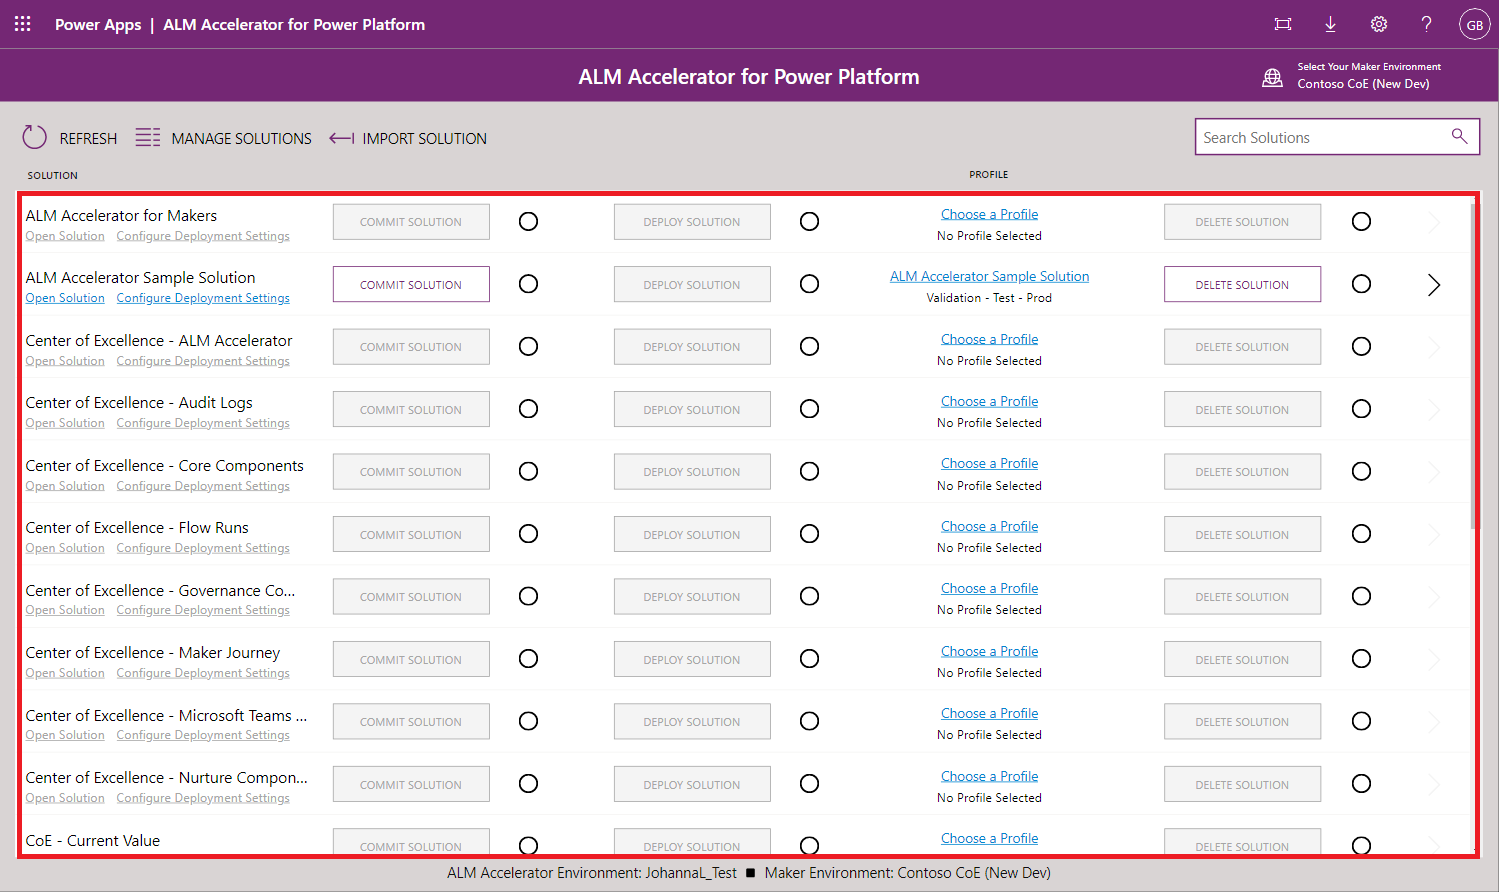 Screenshot of the solution list in the ALM Accelerator advanced maker experience.